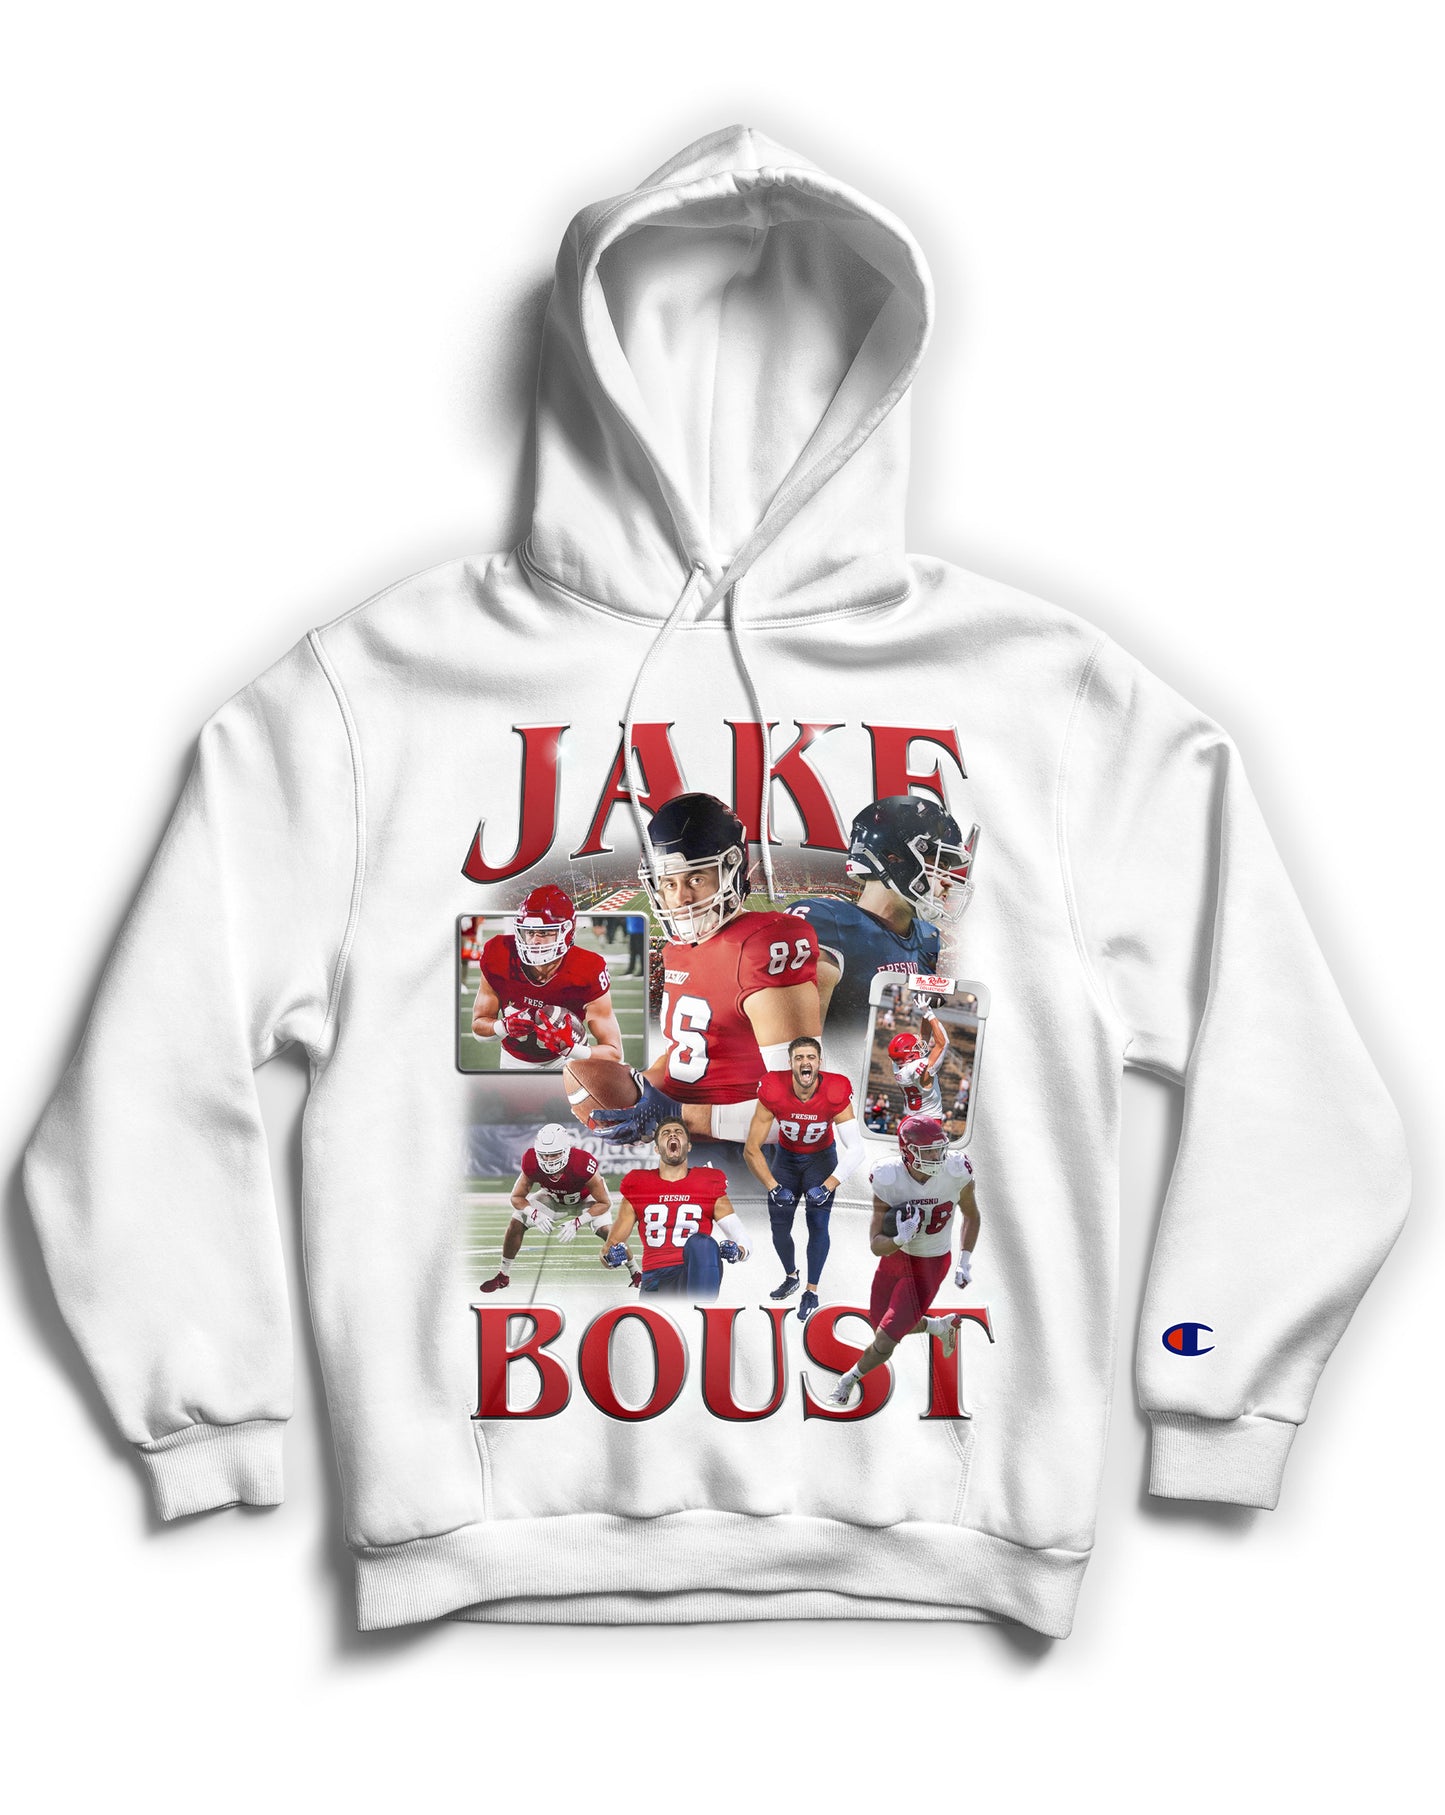 Jake Boust “TE Unstoppable” Tribute Hoodie *LIMITED EDITION* (Black & White)